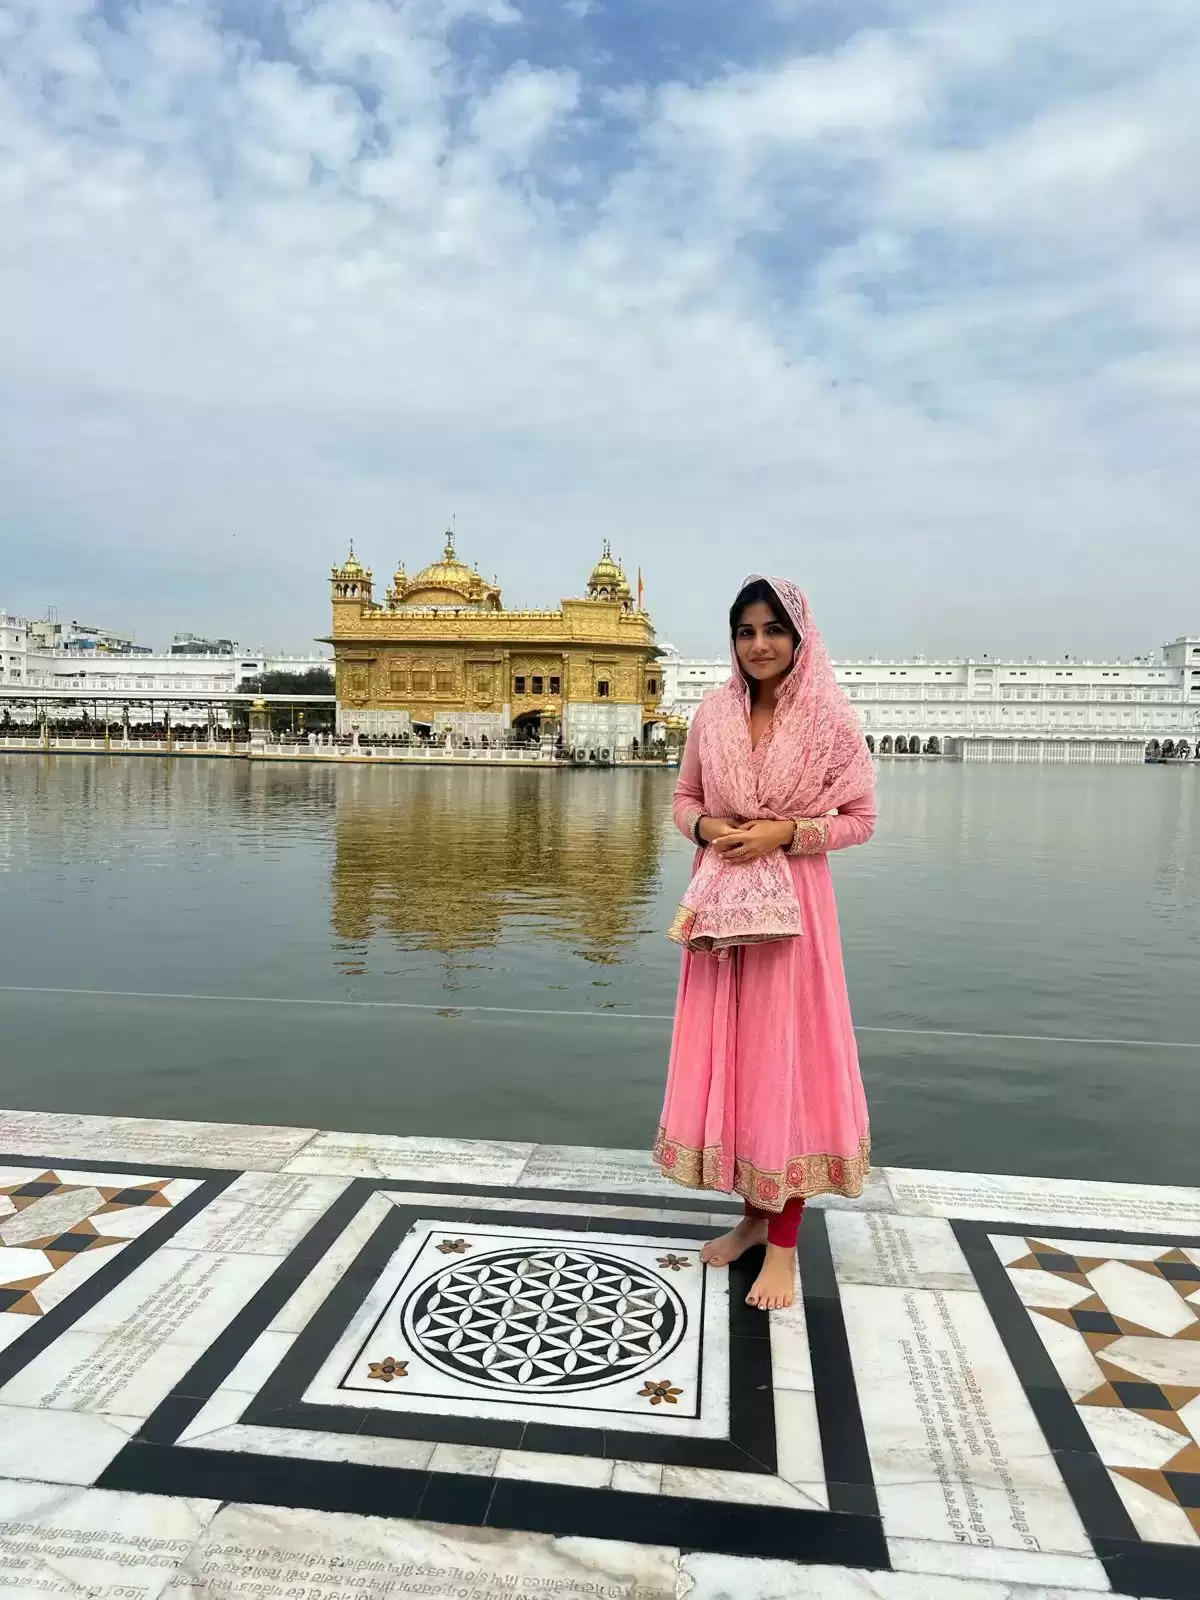 Dhartti Bhatt talks about her trip to Amritsar with Tanvi Dogra